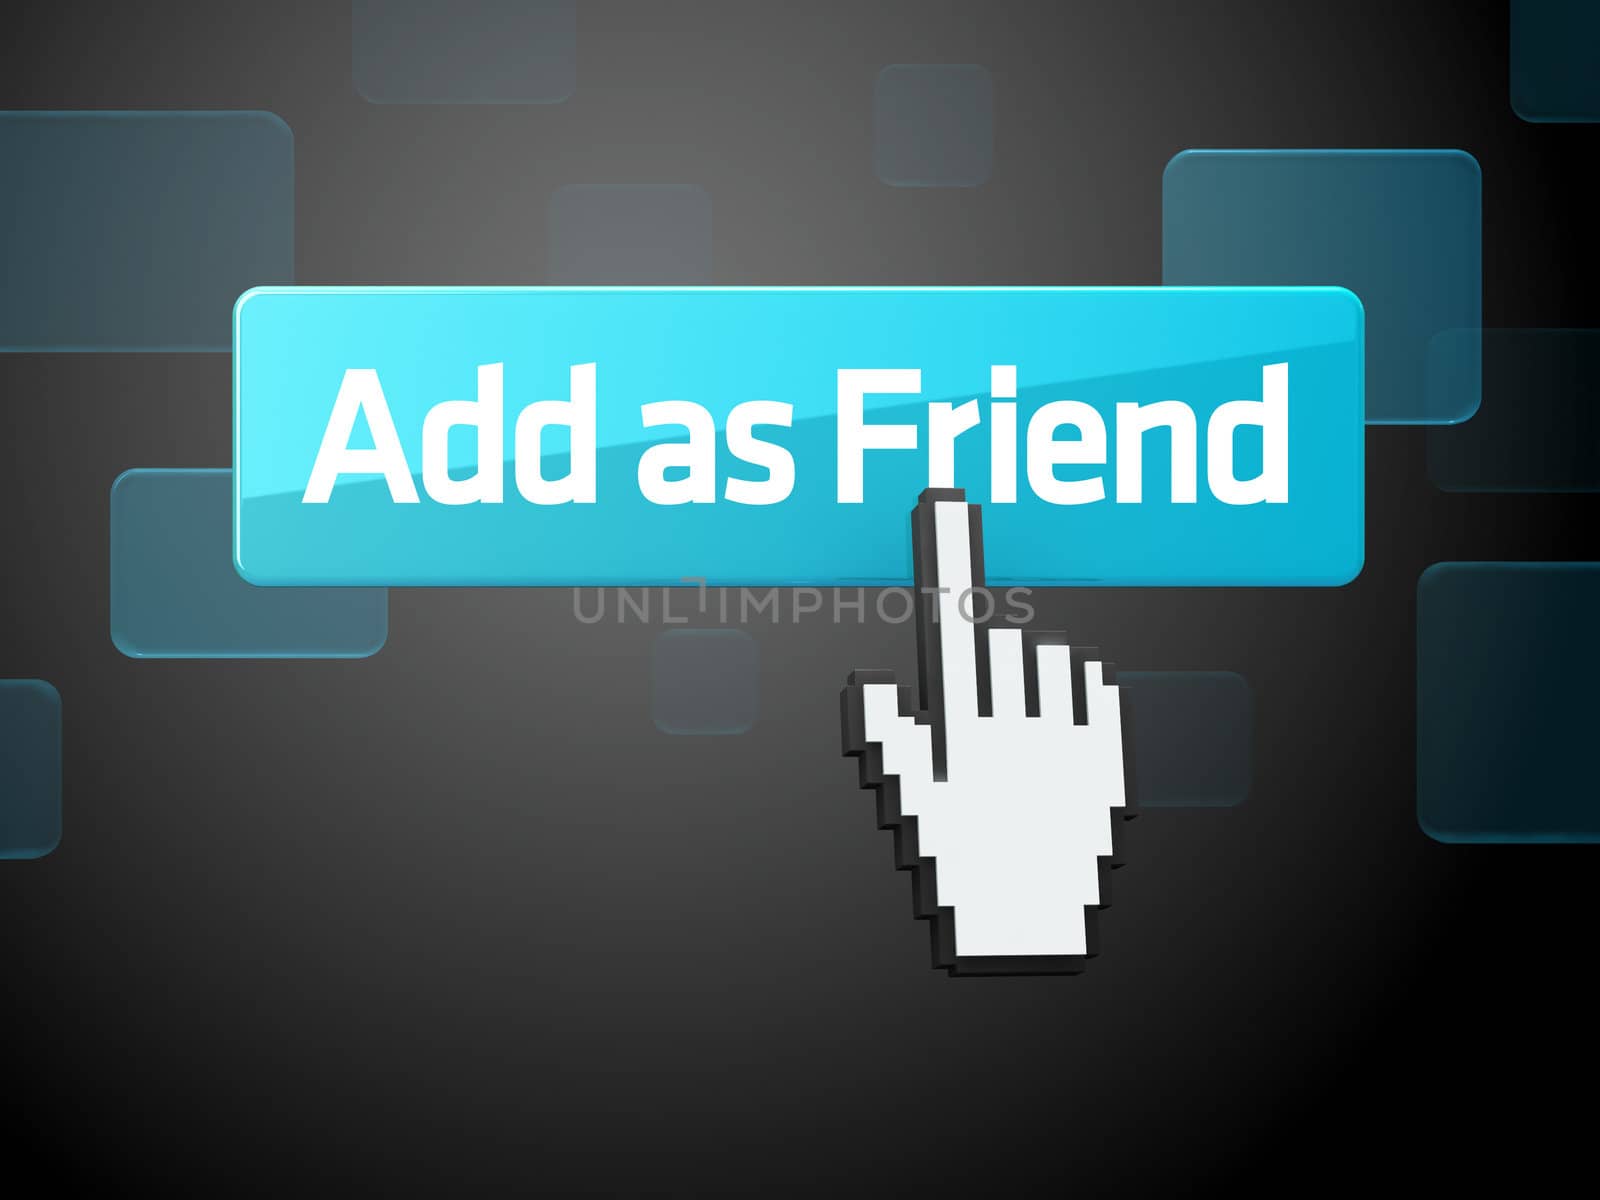 Hand-shaped mouse cursor press Add As Friend button on dark background